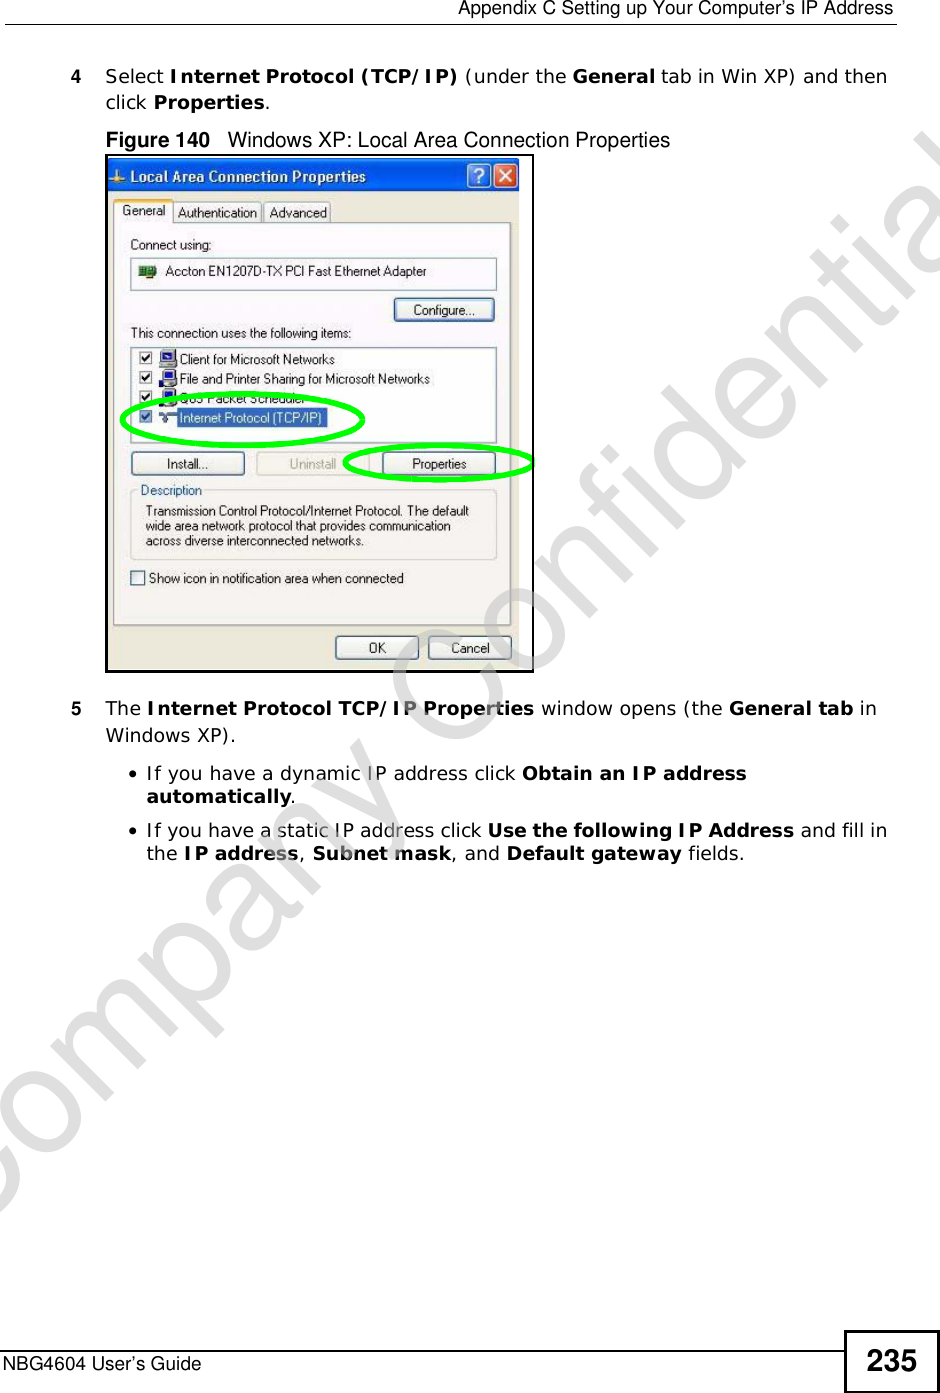  Appendix CSetting up Your Computer’s IP AddressNBG4604 User’s Guide 2354Select Internet Protocol (TCP/IP) (under the General tab in Win XP) and then click Properties.Figure 140   Windows XP: Local Area Connection Properties5The Internet Protocol TCP/IP Properties window opens (the General tab in Windows XP).•If you have a dynamic IP address click Obtain an IP address automatically.•If you have a static IP address click Use the following IP Address and fill in the IP address,Subnet mask, and Default gateway fields. Company Confidential